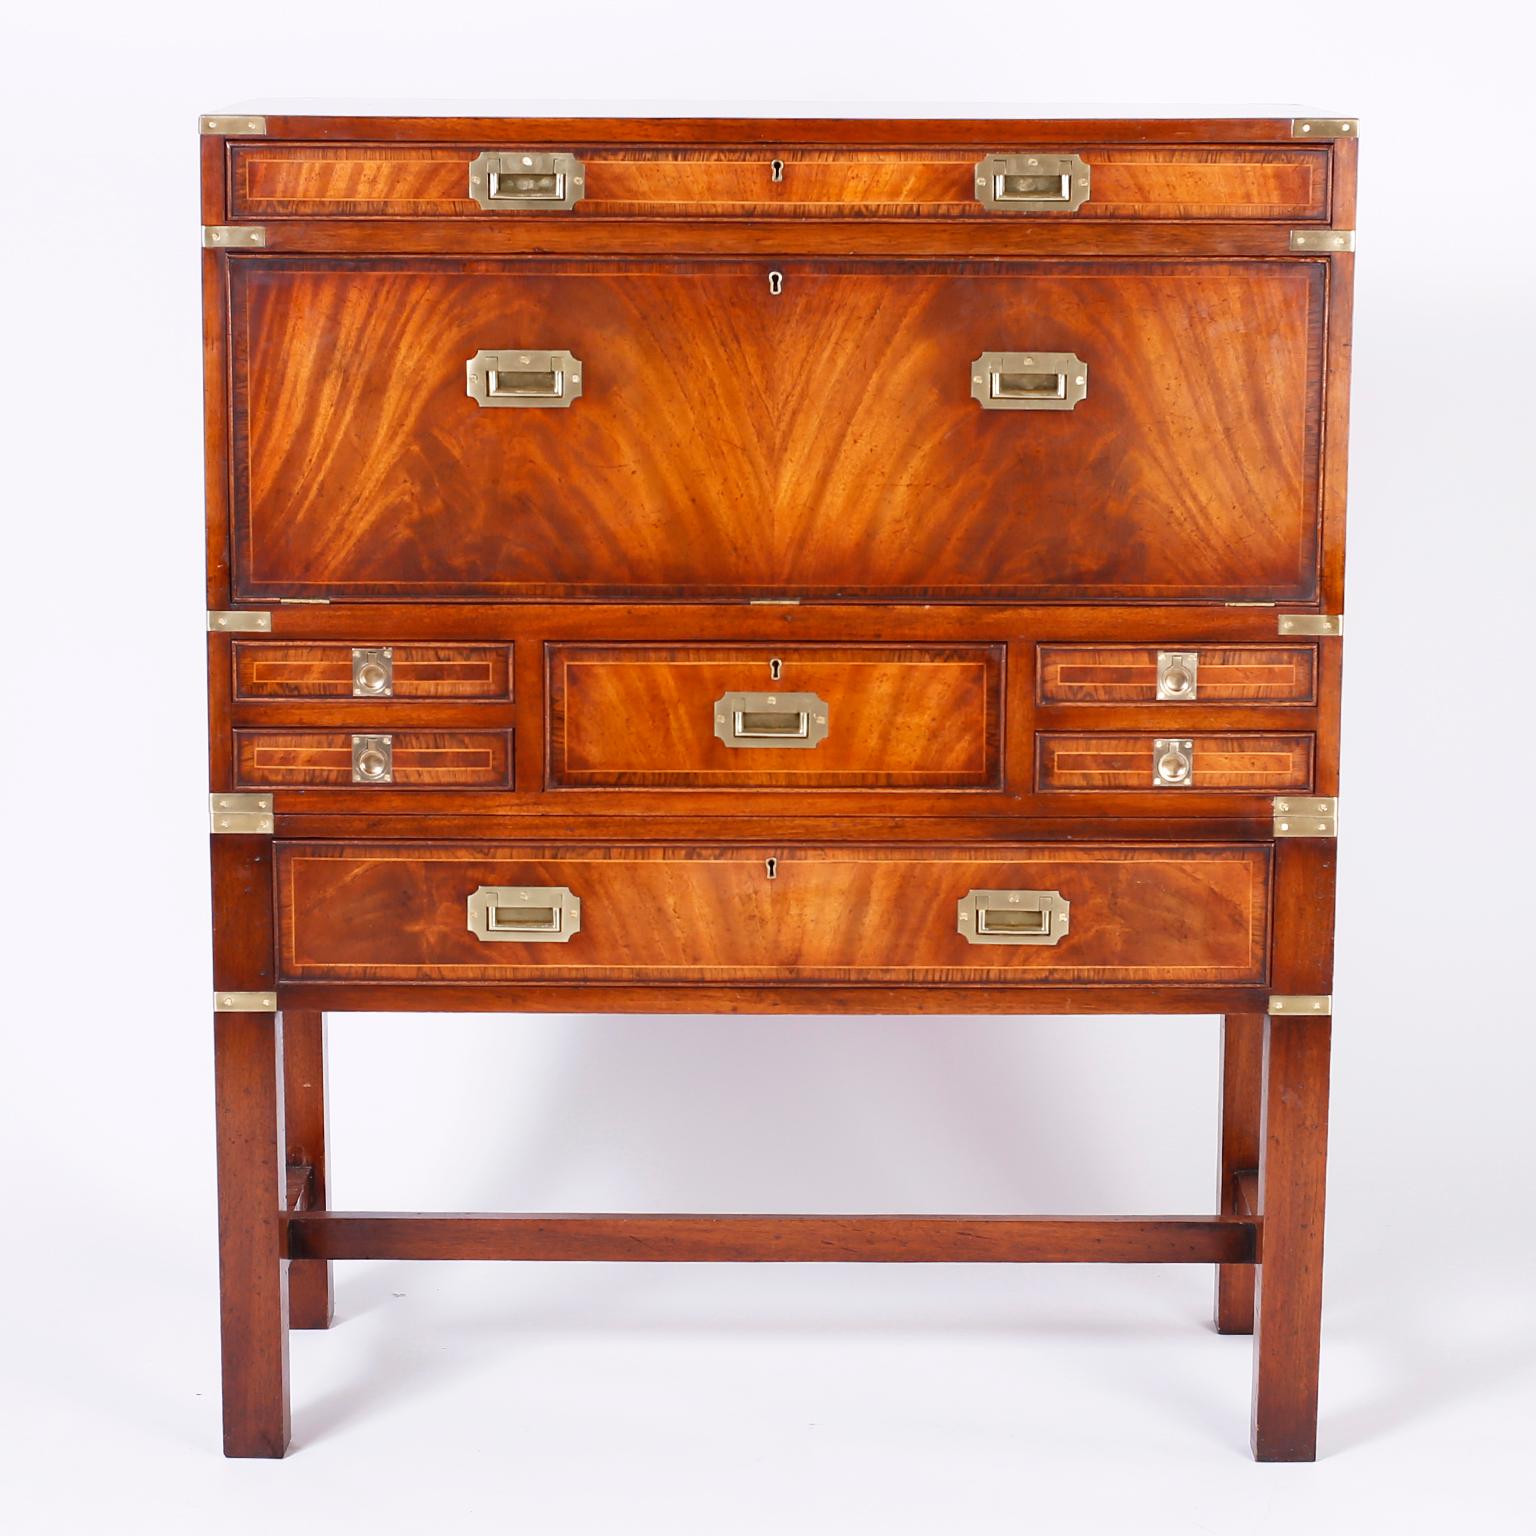 Antique English campaign chest on stand with seven drawers in assorted sizes, brass hardware and featuring exotic cuts of flame mahogany and a fall front butlers desk with slots, drawers and retaining the original tooled olive green leather.